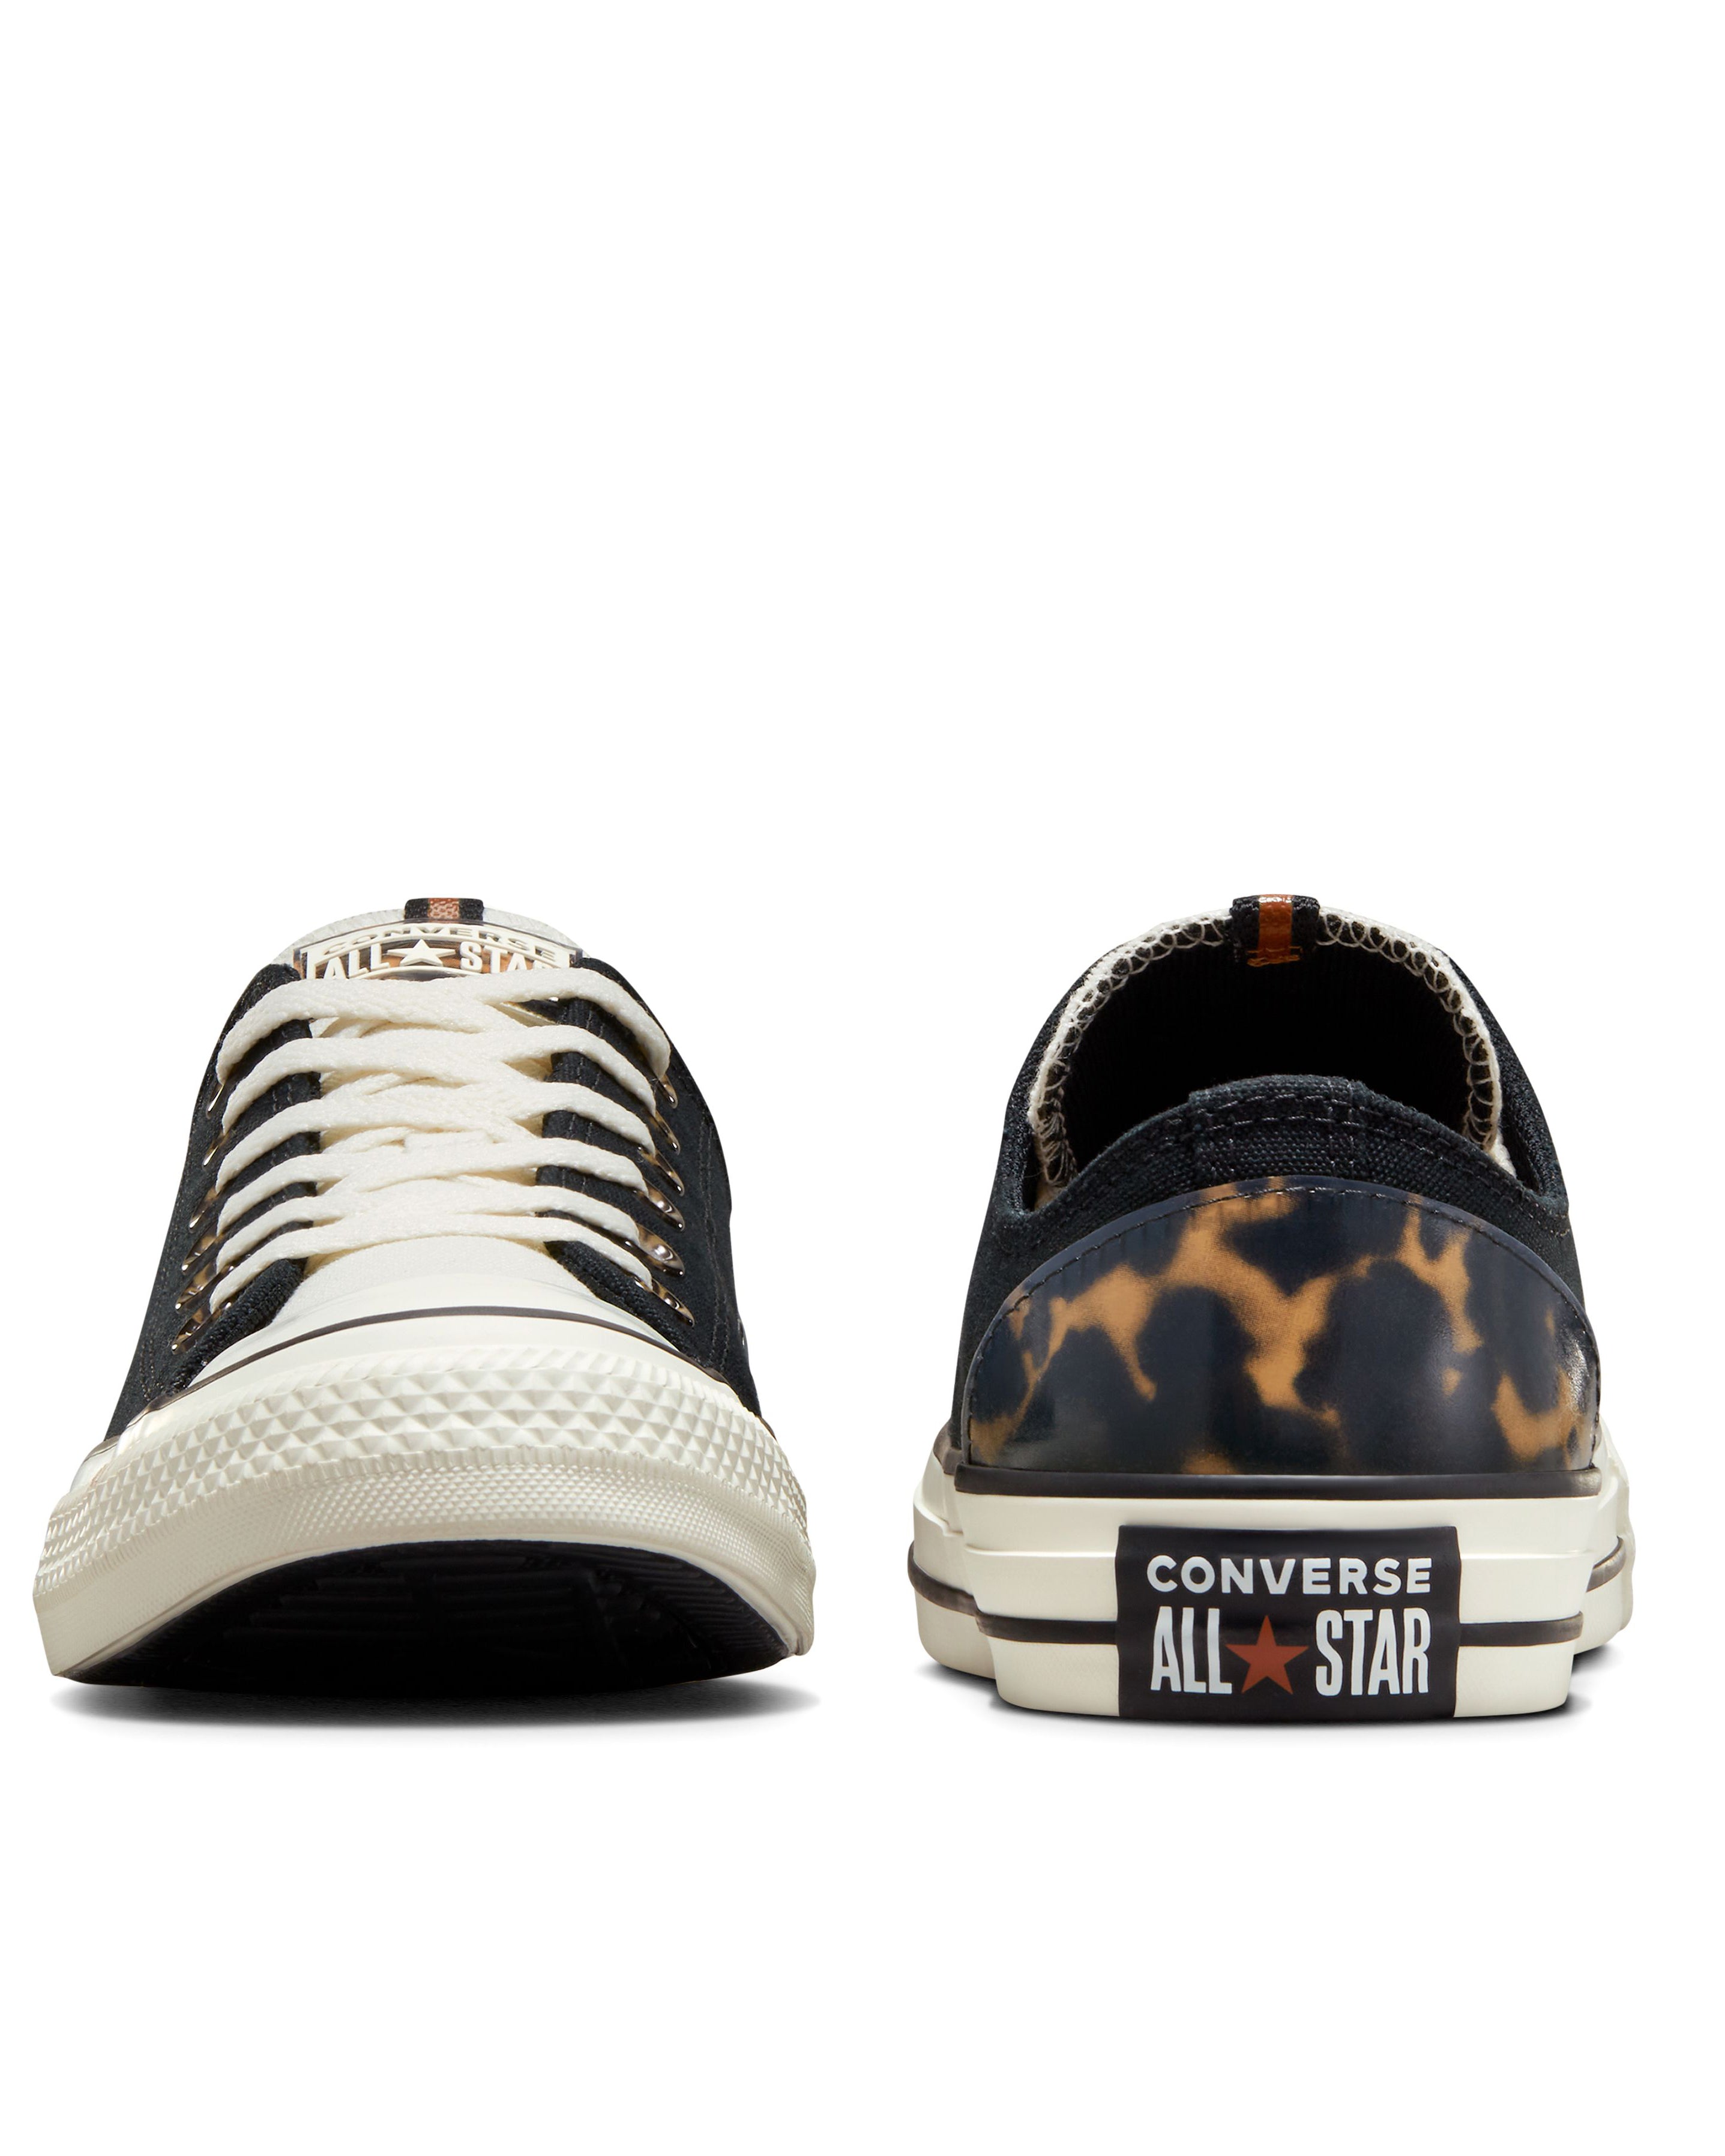 Converse Chuck Taylor Future Archive High Low - Black/Egret/Tawny Owl